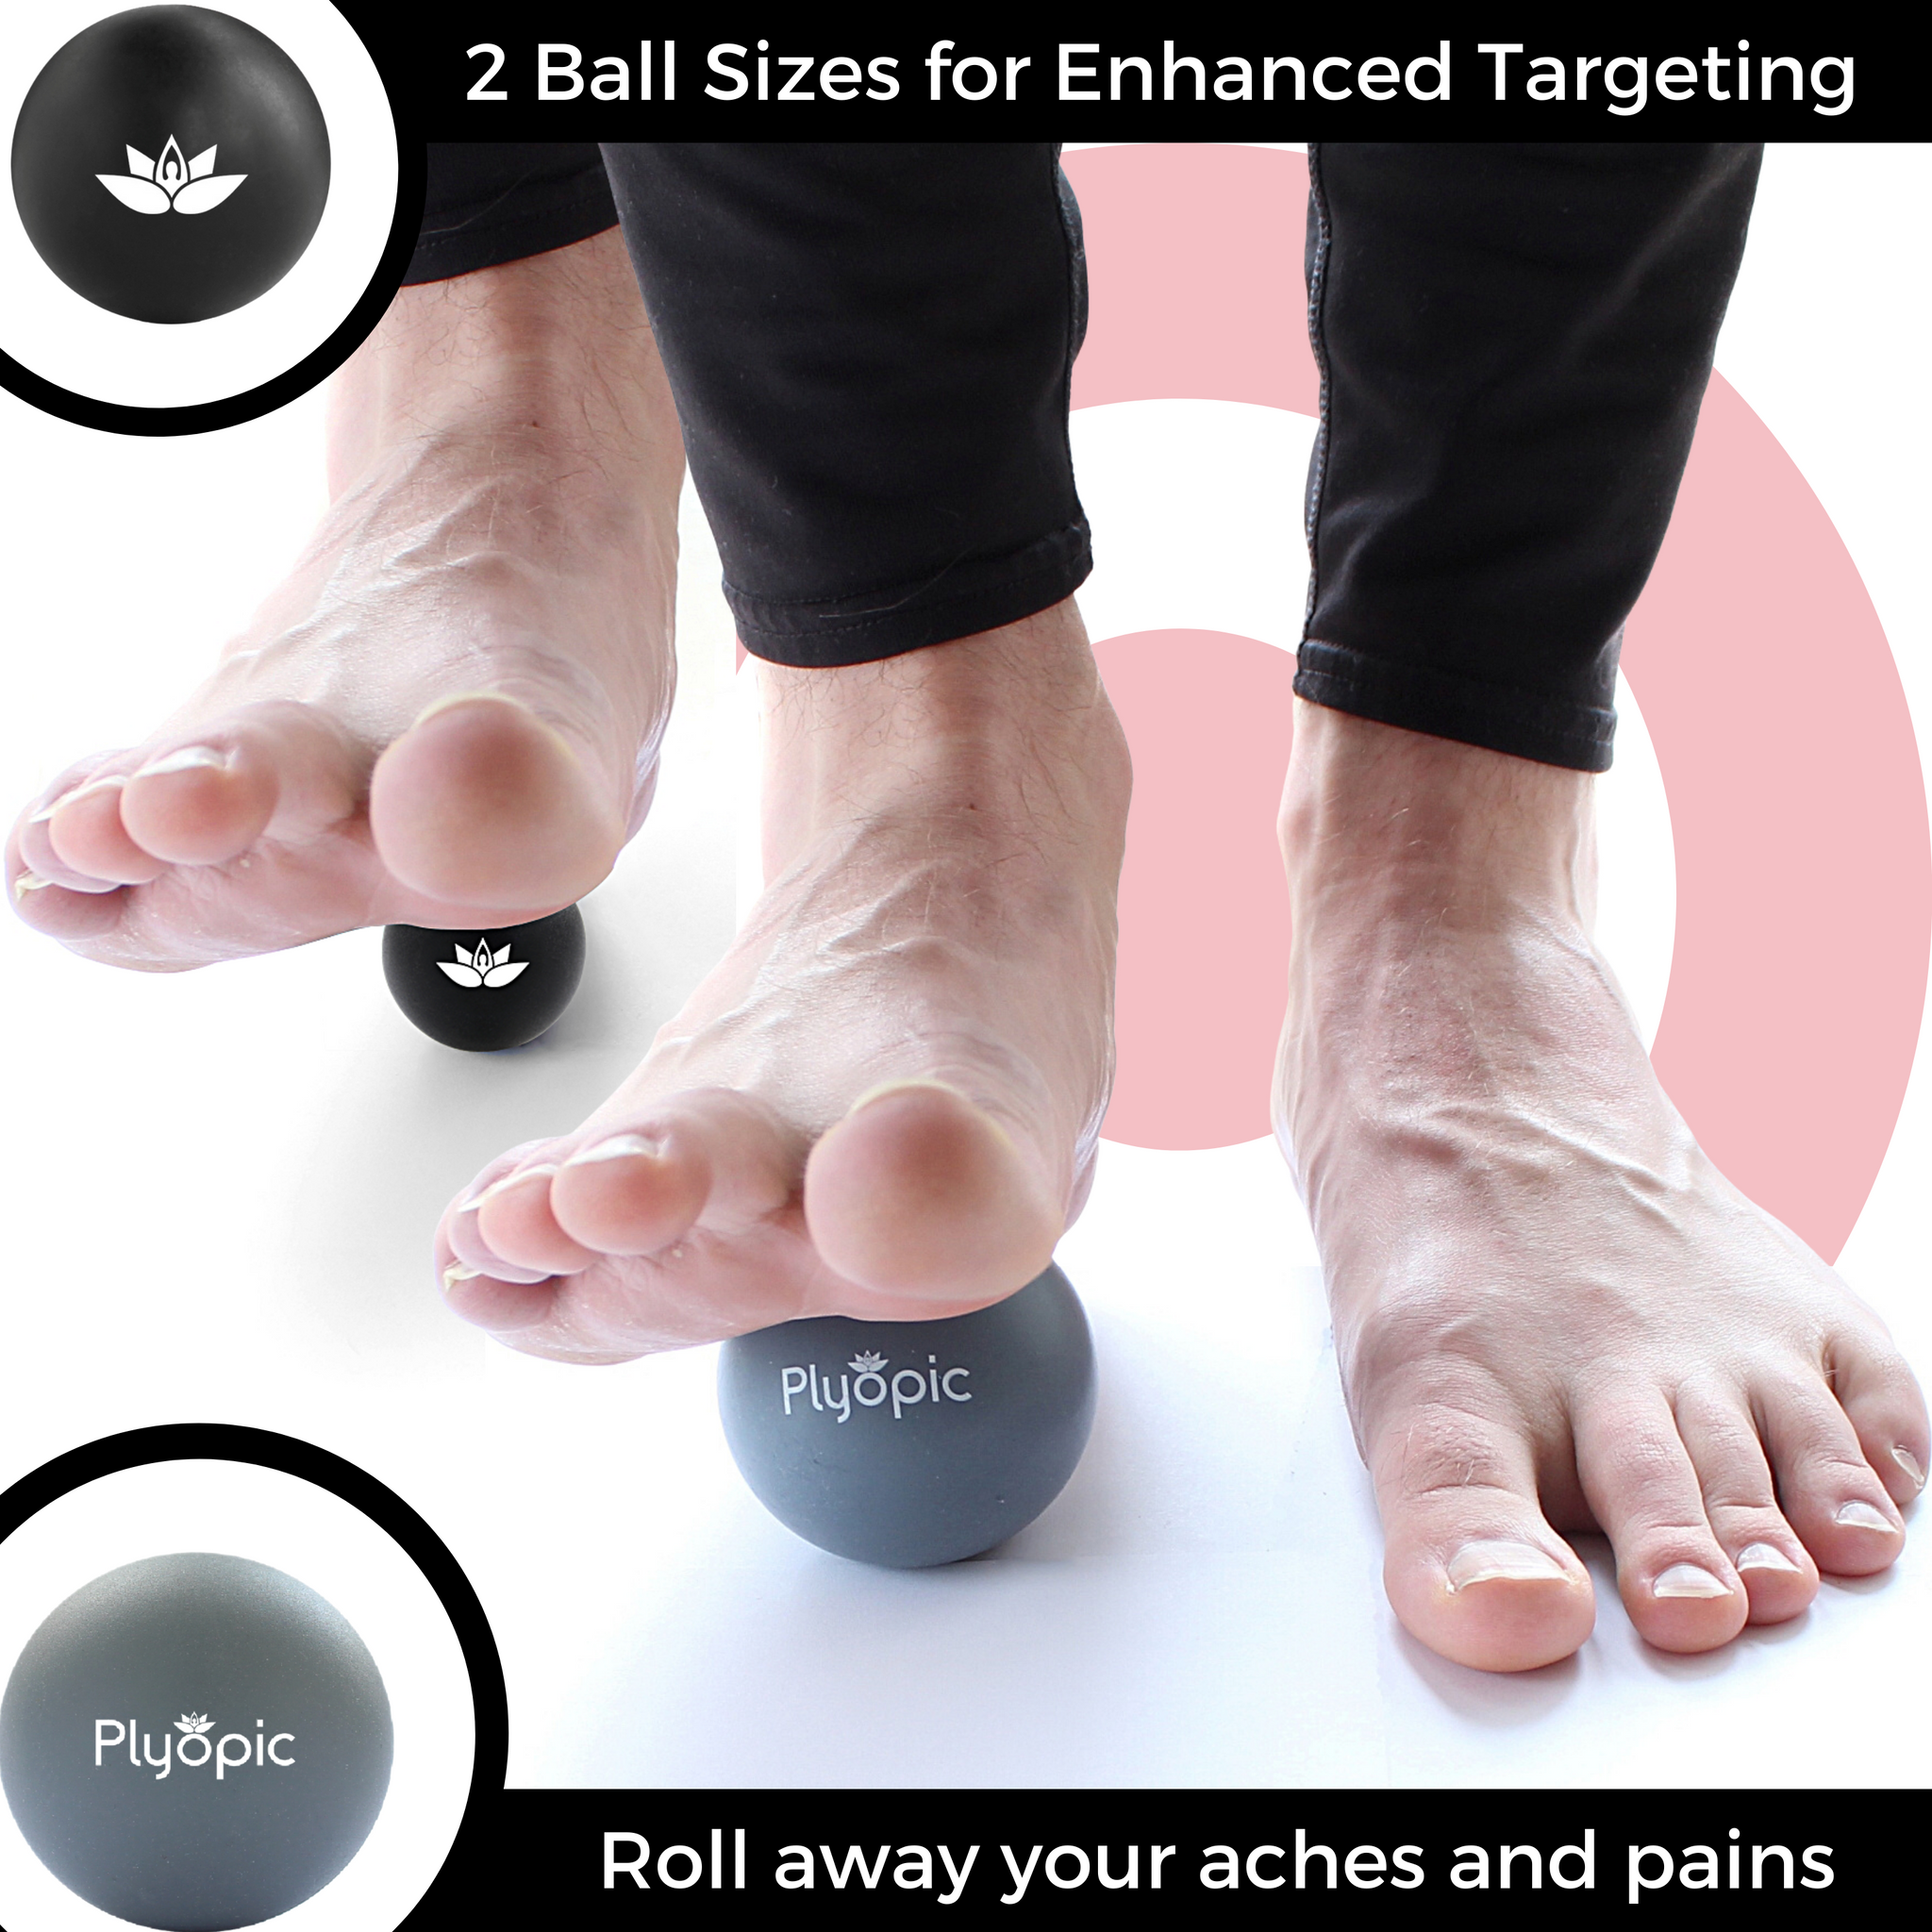 Plyopic Foot Massage Ball Set - with Spiky Balls Smooth Balls and Mini Massage Roller